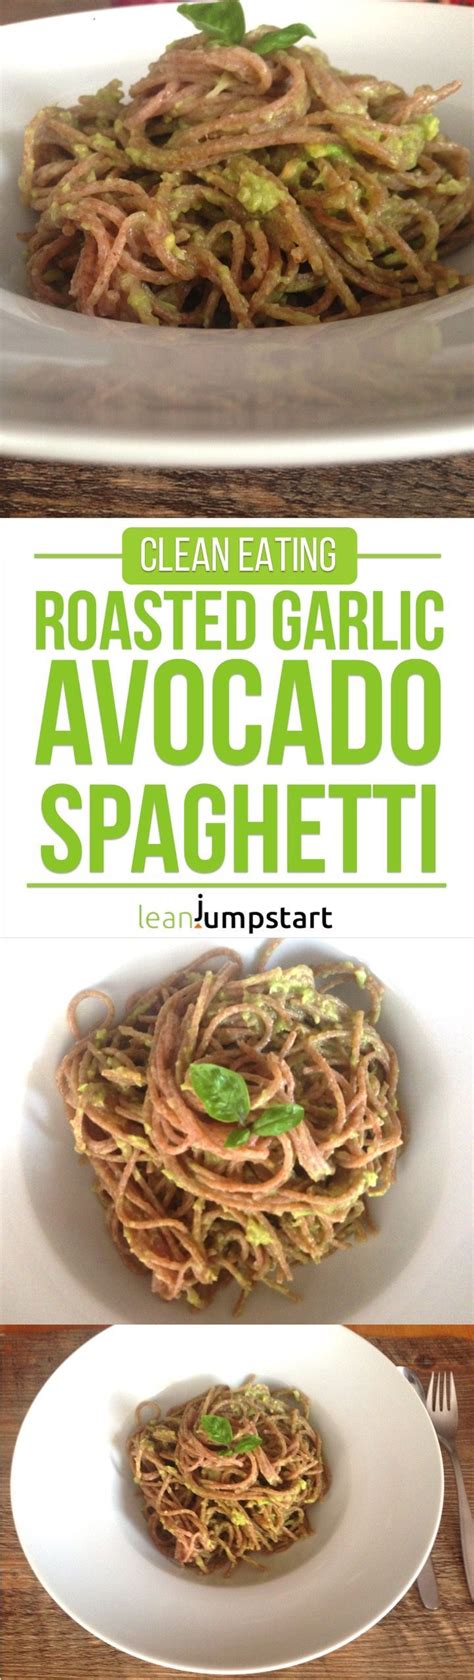 Yes, keto vegetable recipes, keto isn't all bacon, butter, and steak you know. roasted garlic avocado spaghetti: a fiber rich pasta meal ...